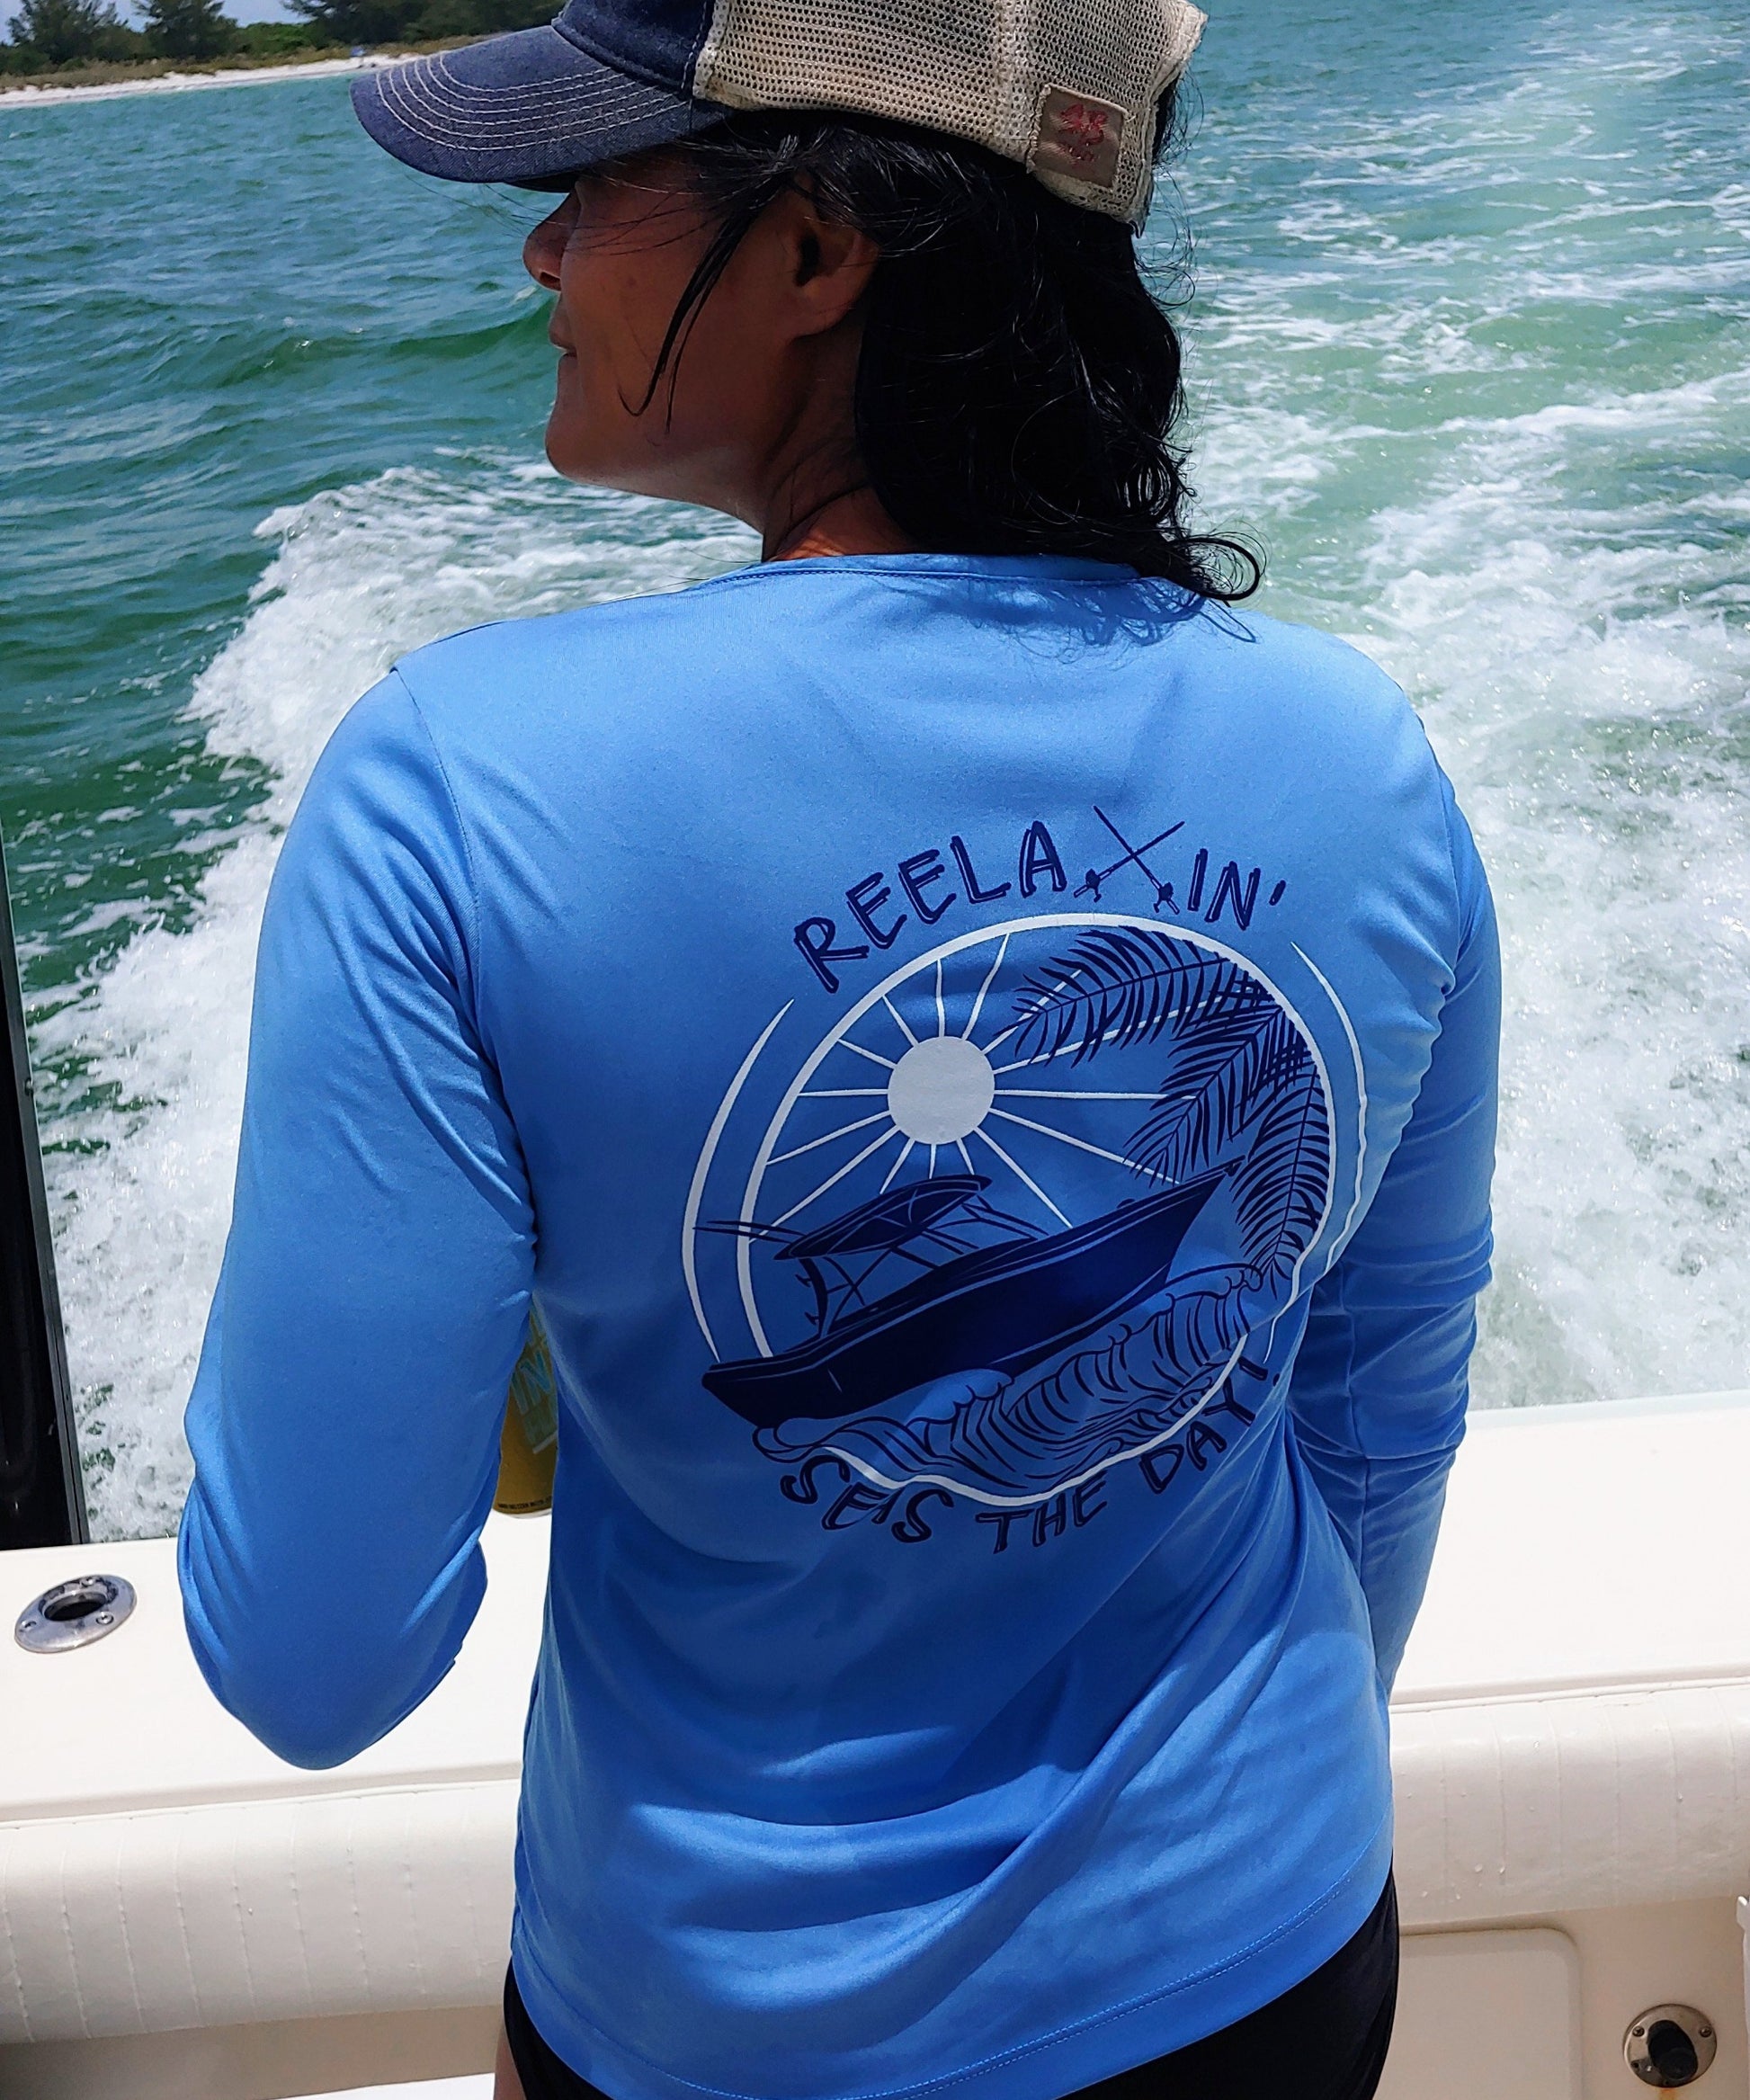 Women's Reelaxin' -Seas The Day Performance V-Neck Long & Short Sleeve Shirts - New Hoodies! L / Ladies Pink V-Neck L/S